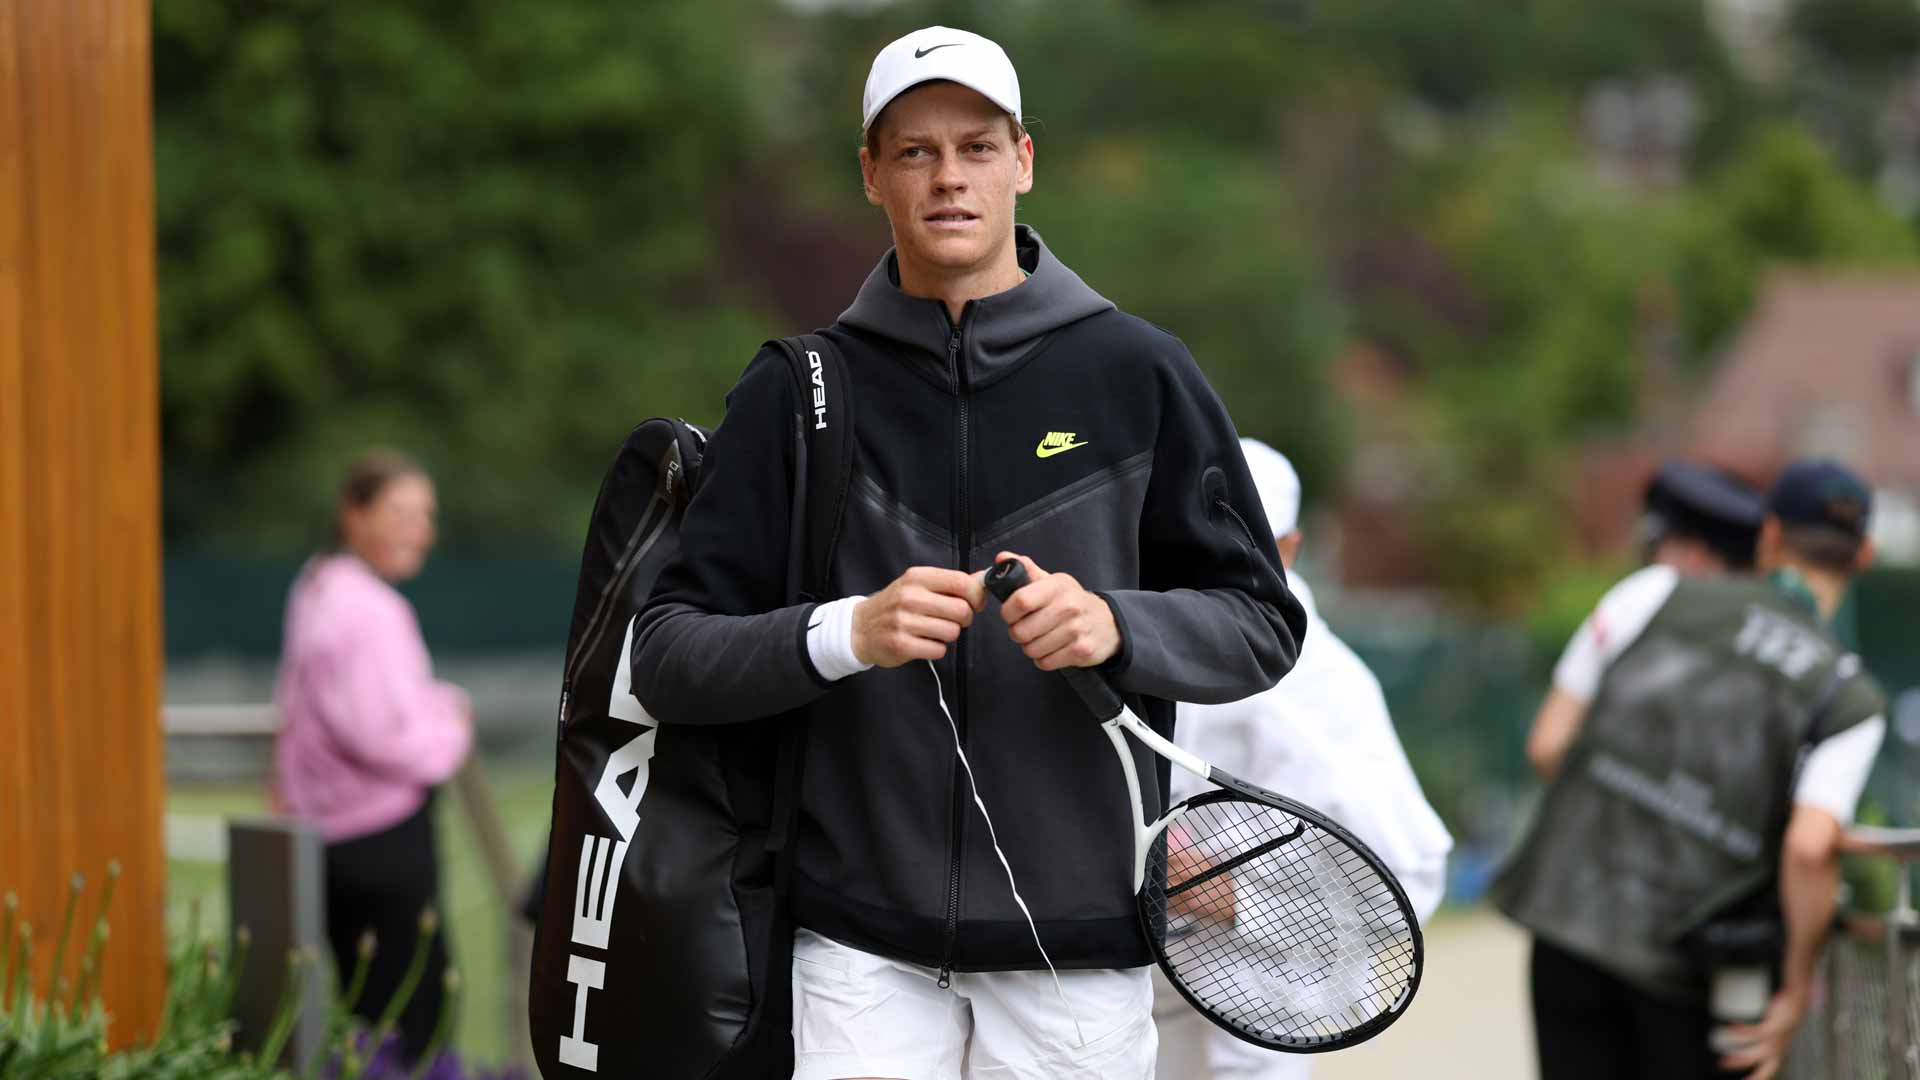 Jannik Sinner is the top seed at a major for the first time.